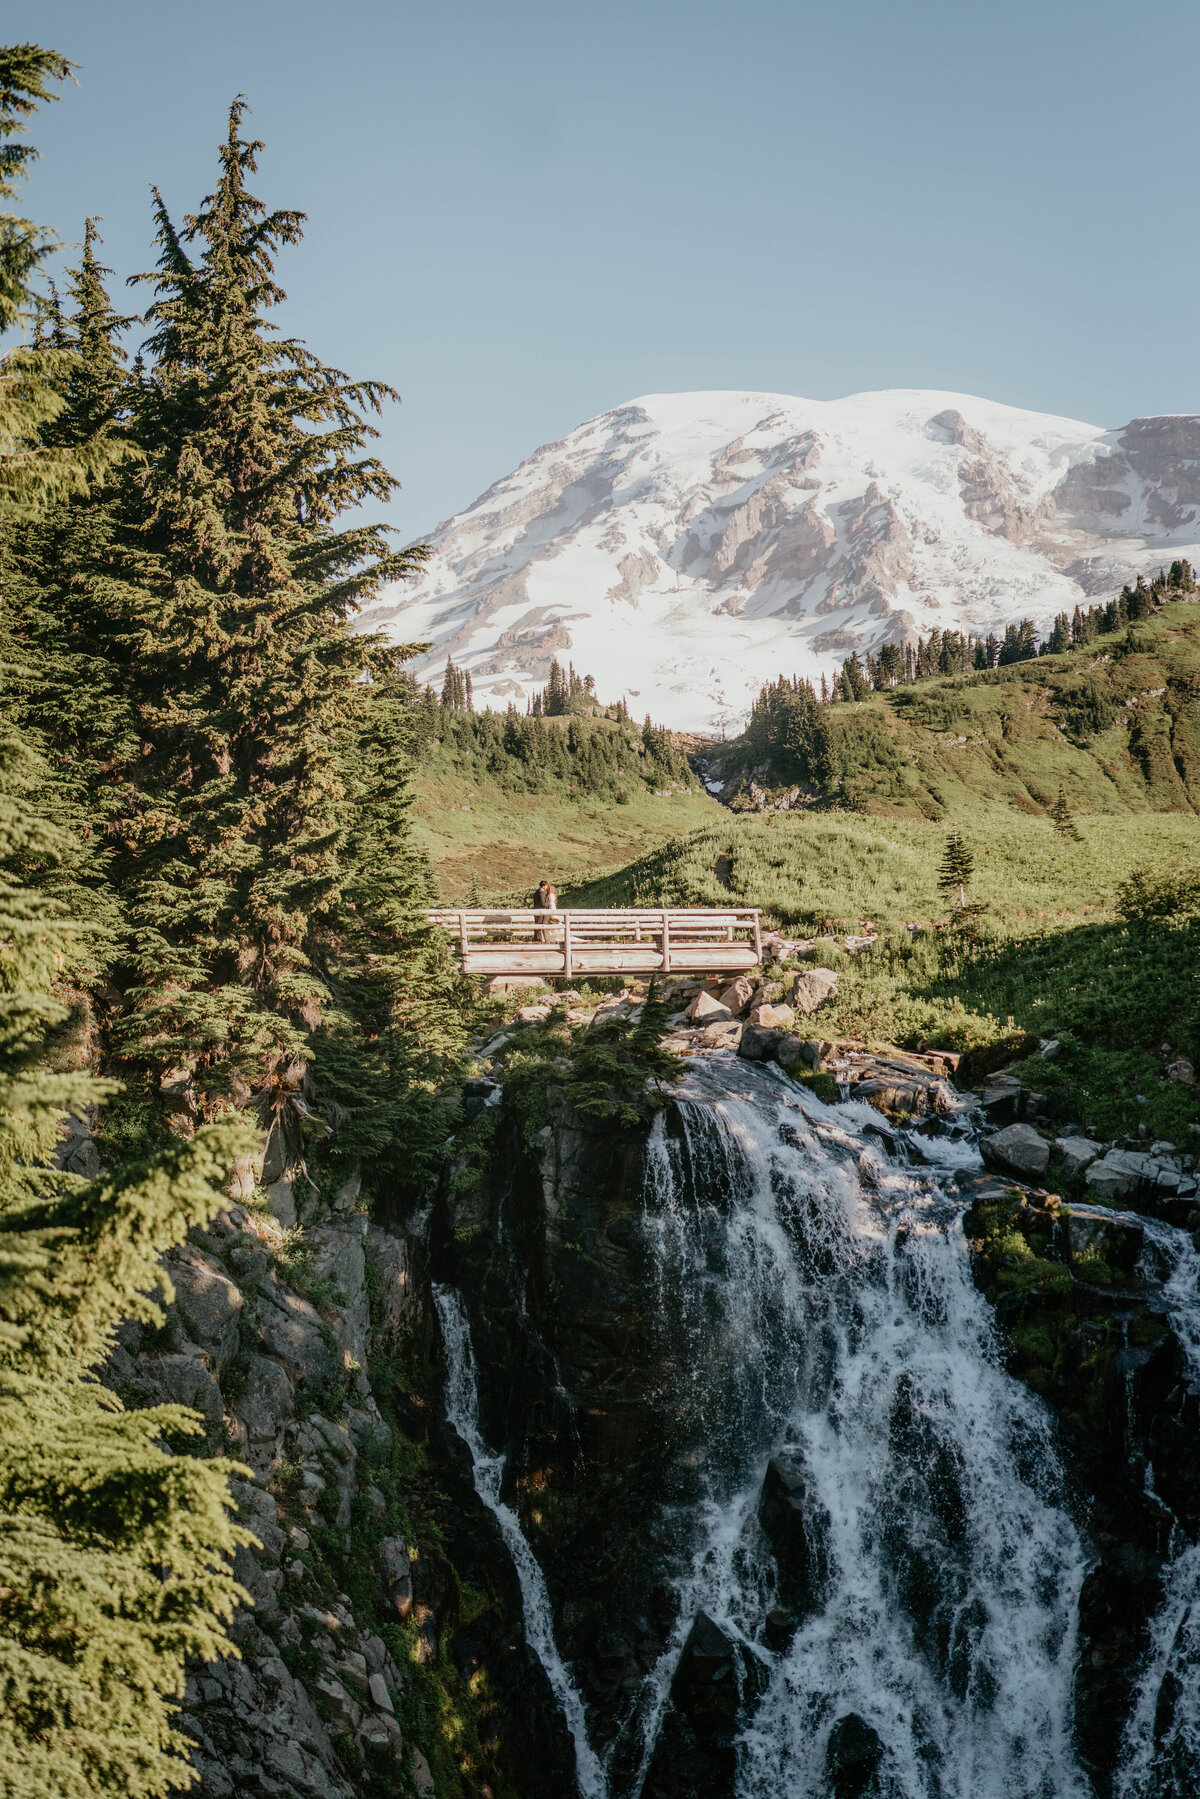 Tiny couple crossing a bridge at Myrtle Falls with views of Mt Rainier